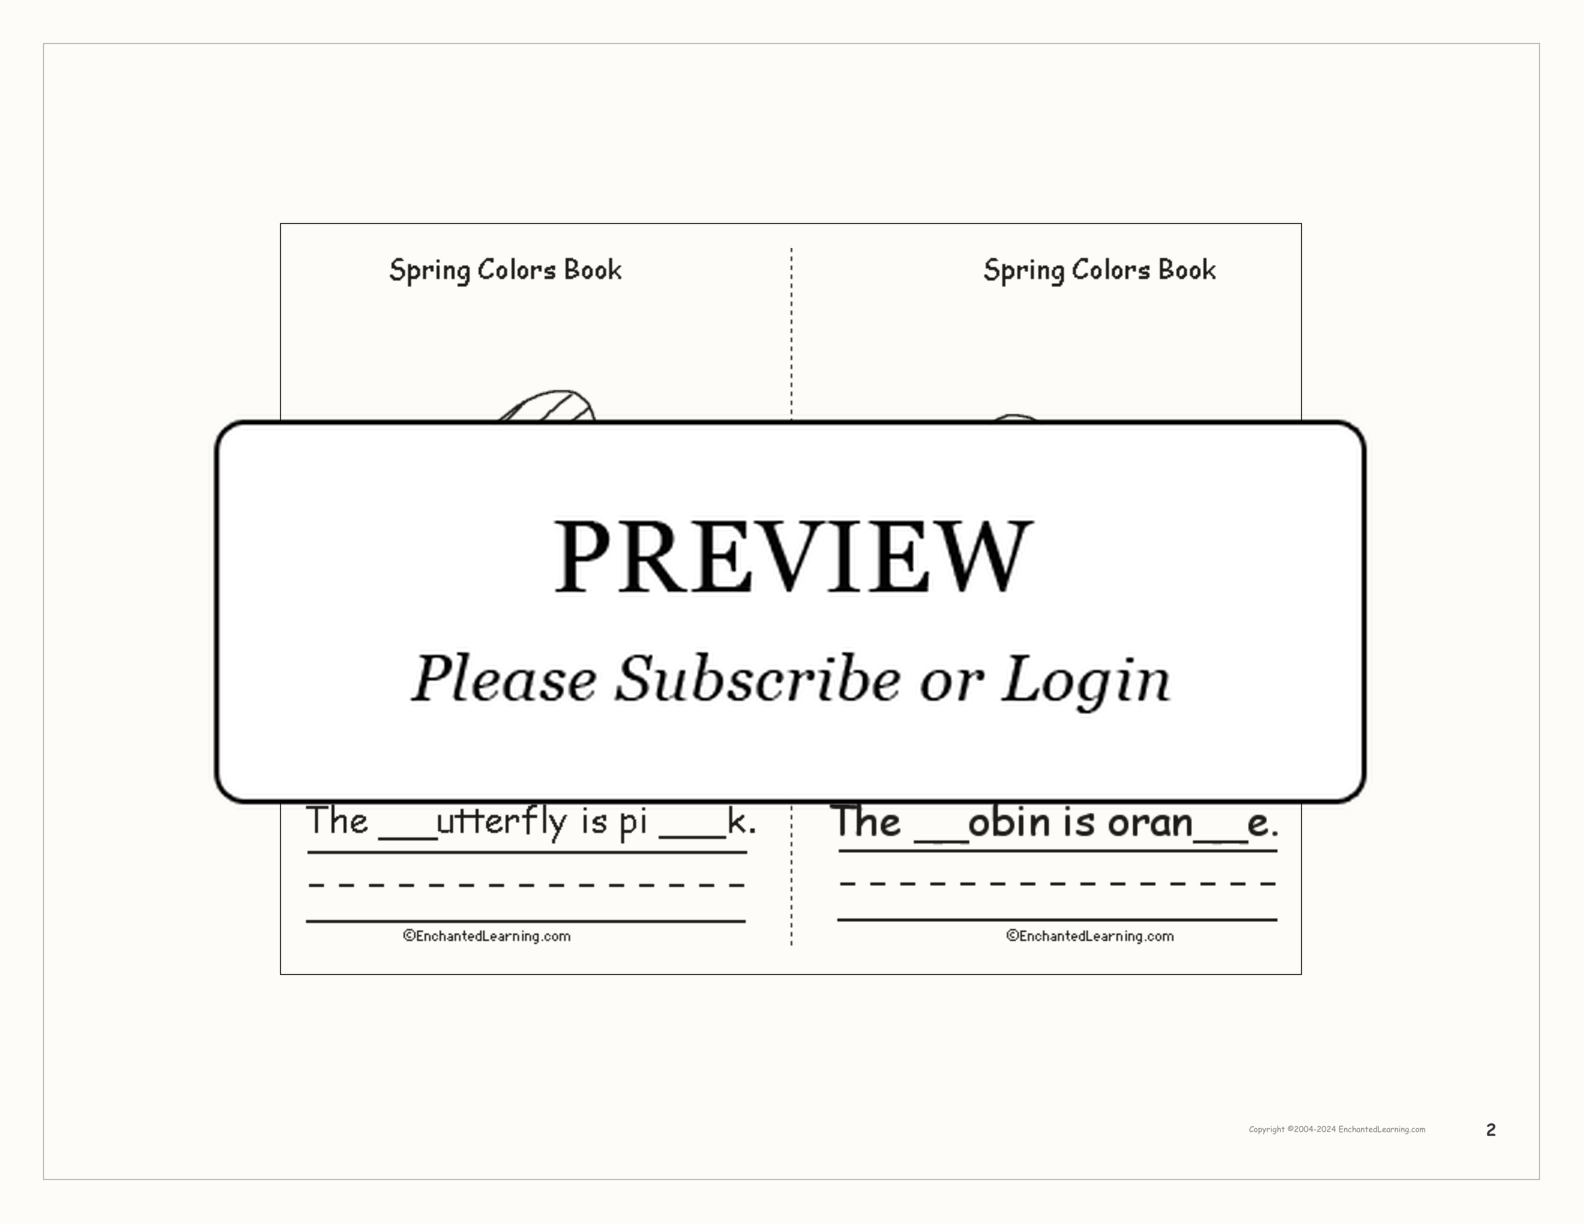 Spring Colors Book interactive worksheet page 2